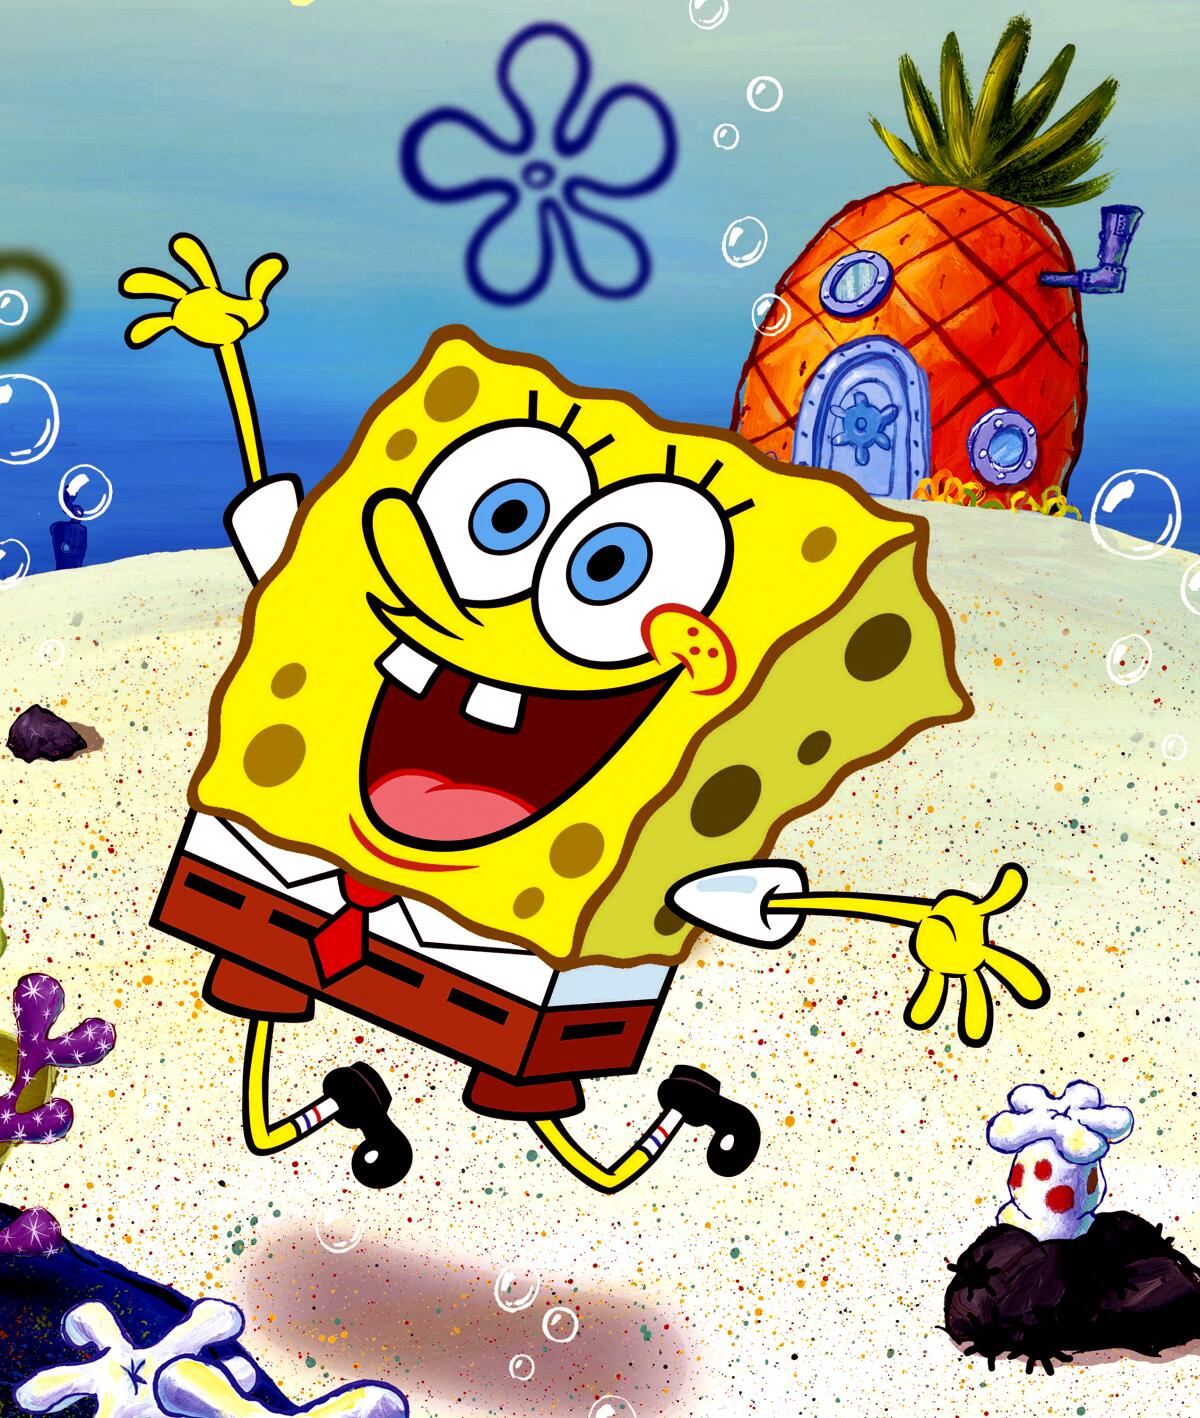 An animated sponge jumps for joy with a big smile on his face